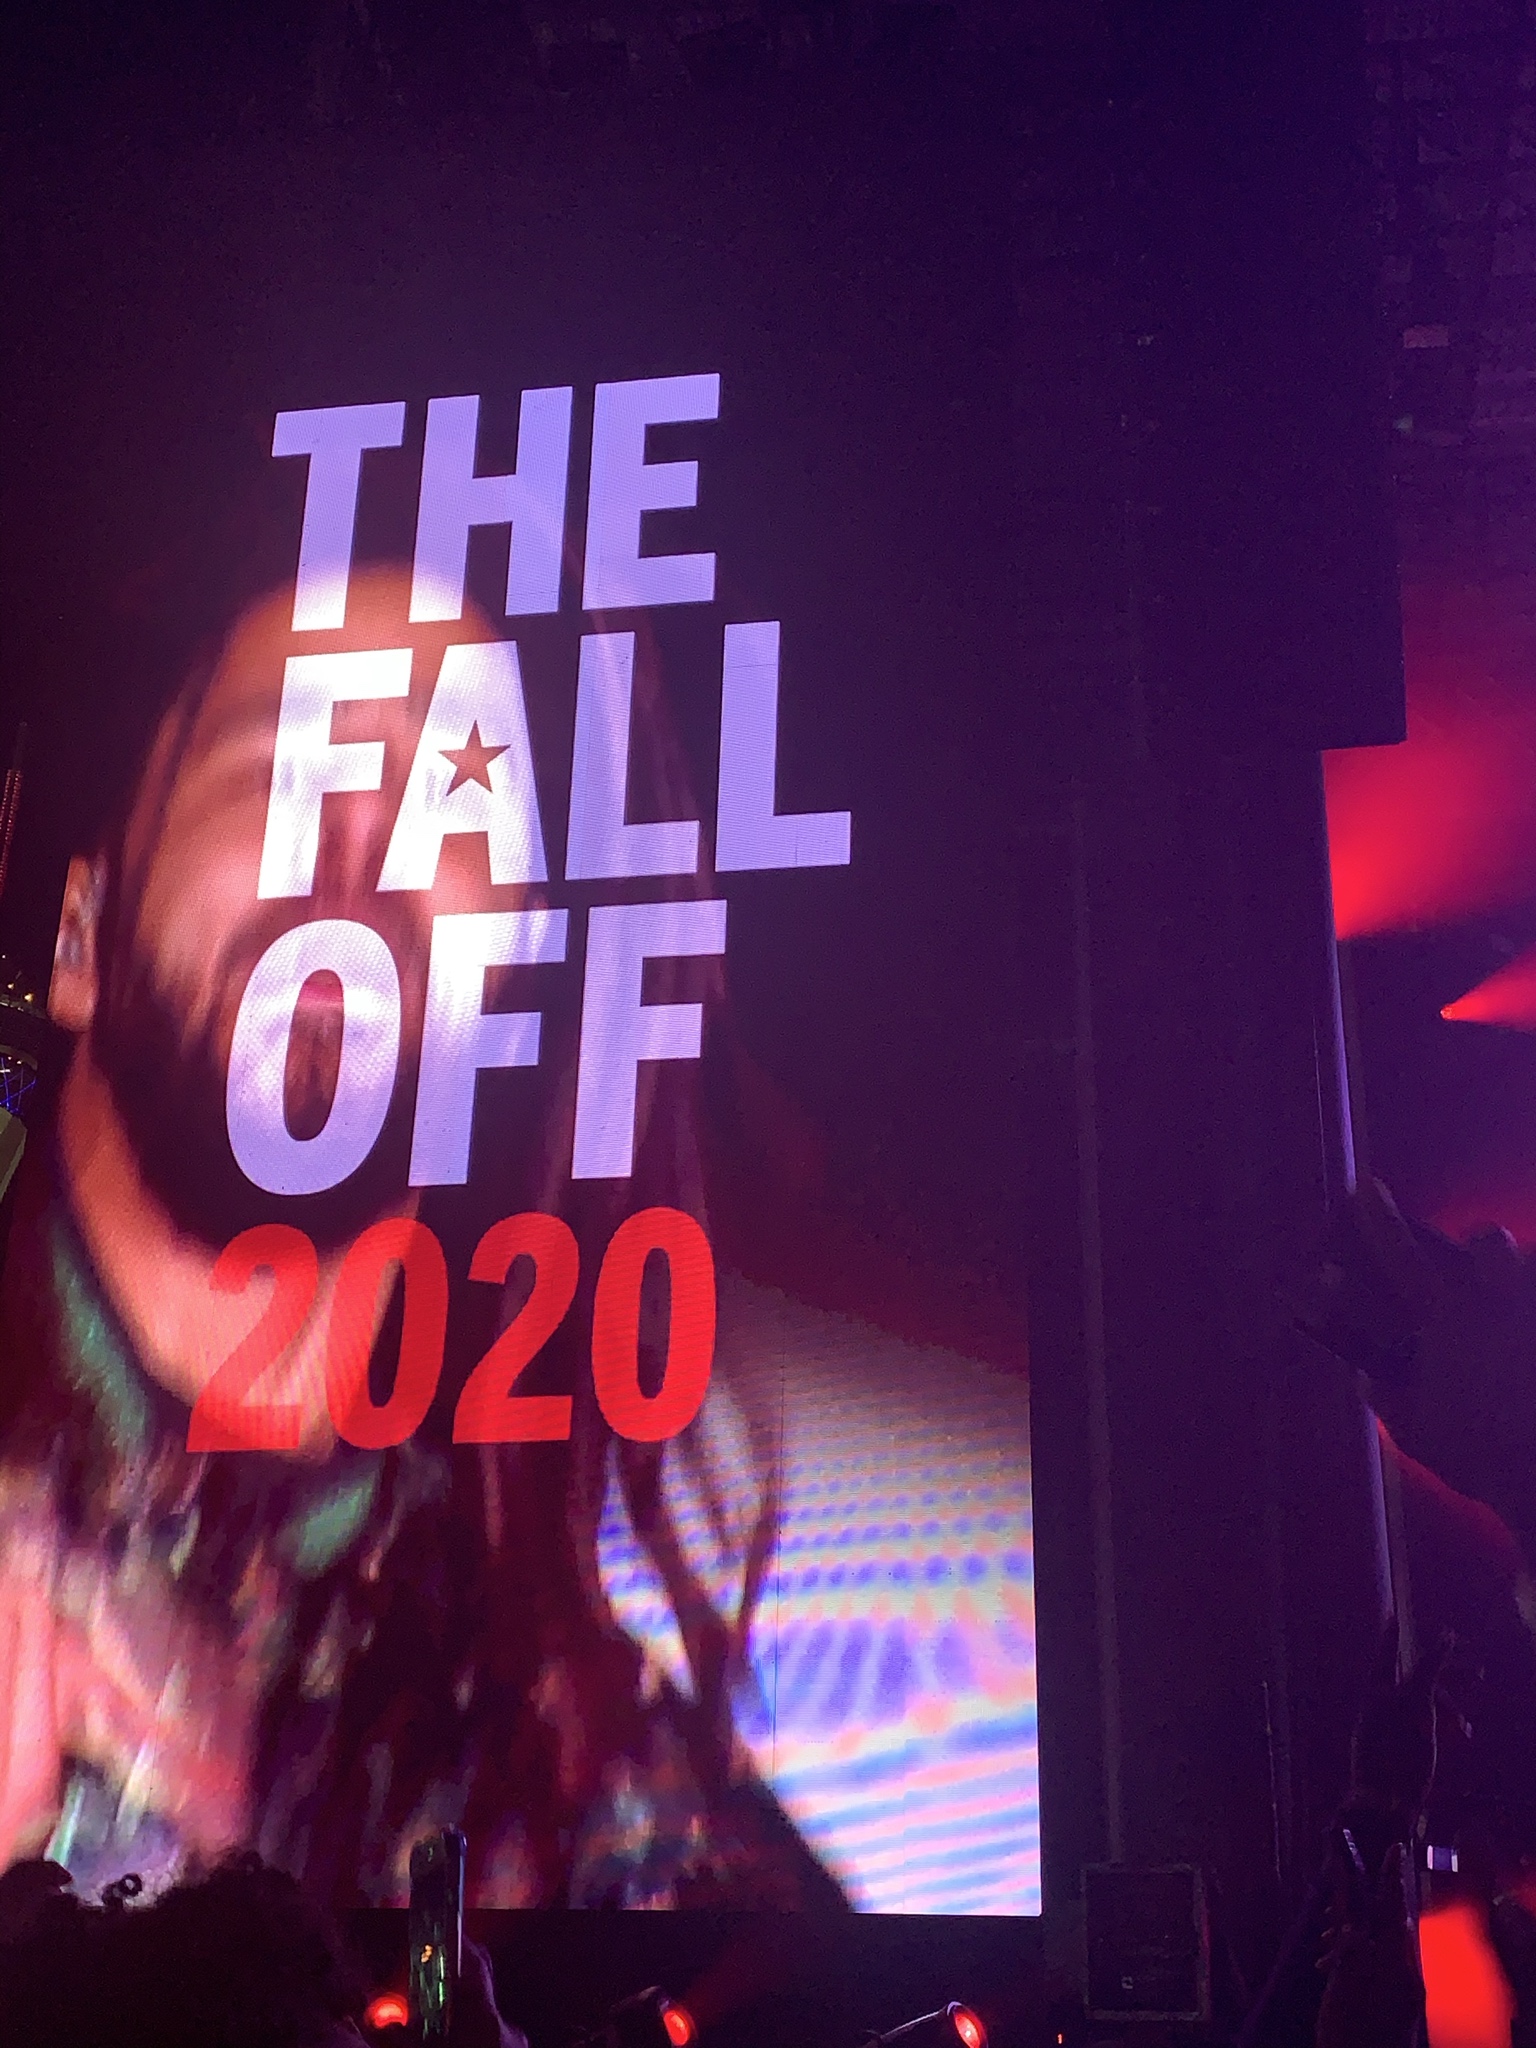 J. Cole Announces Next Album 'The Fall Off' To Release Next Year | HipHop-N-More